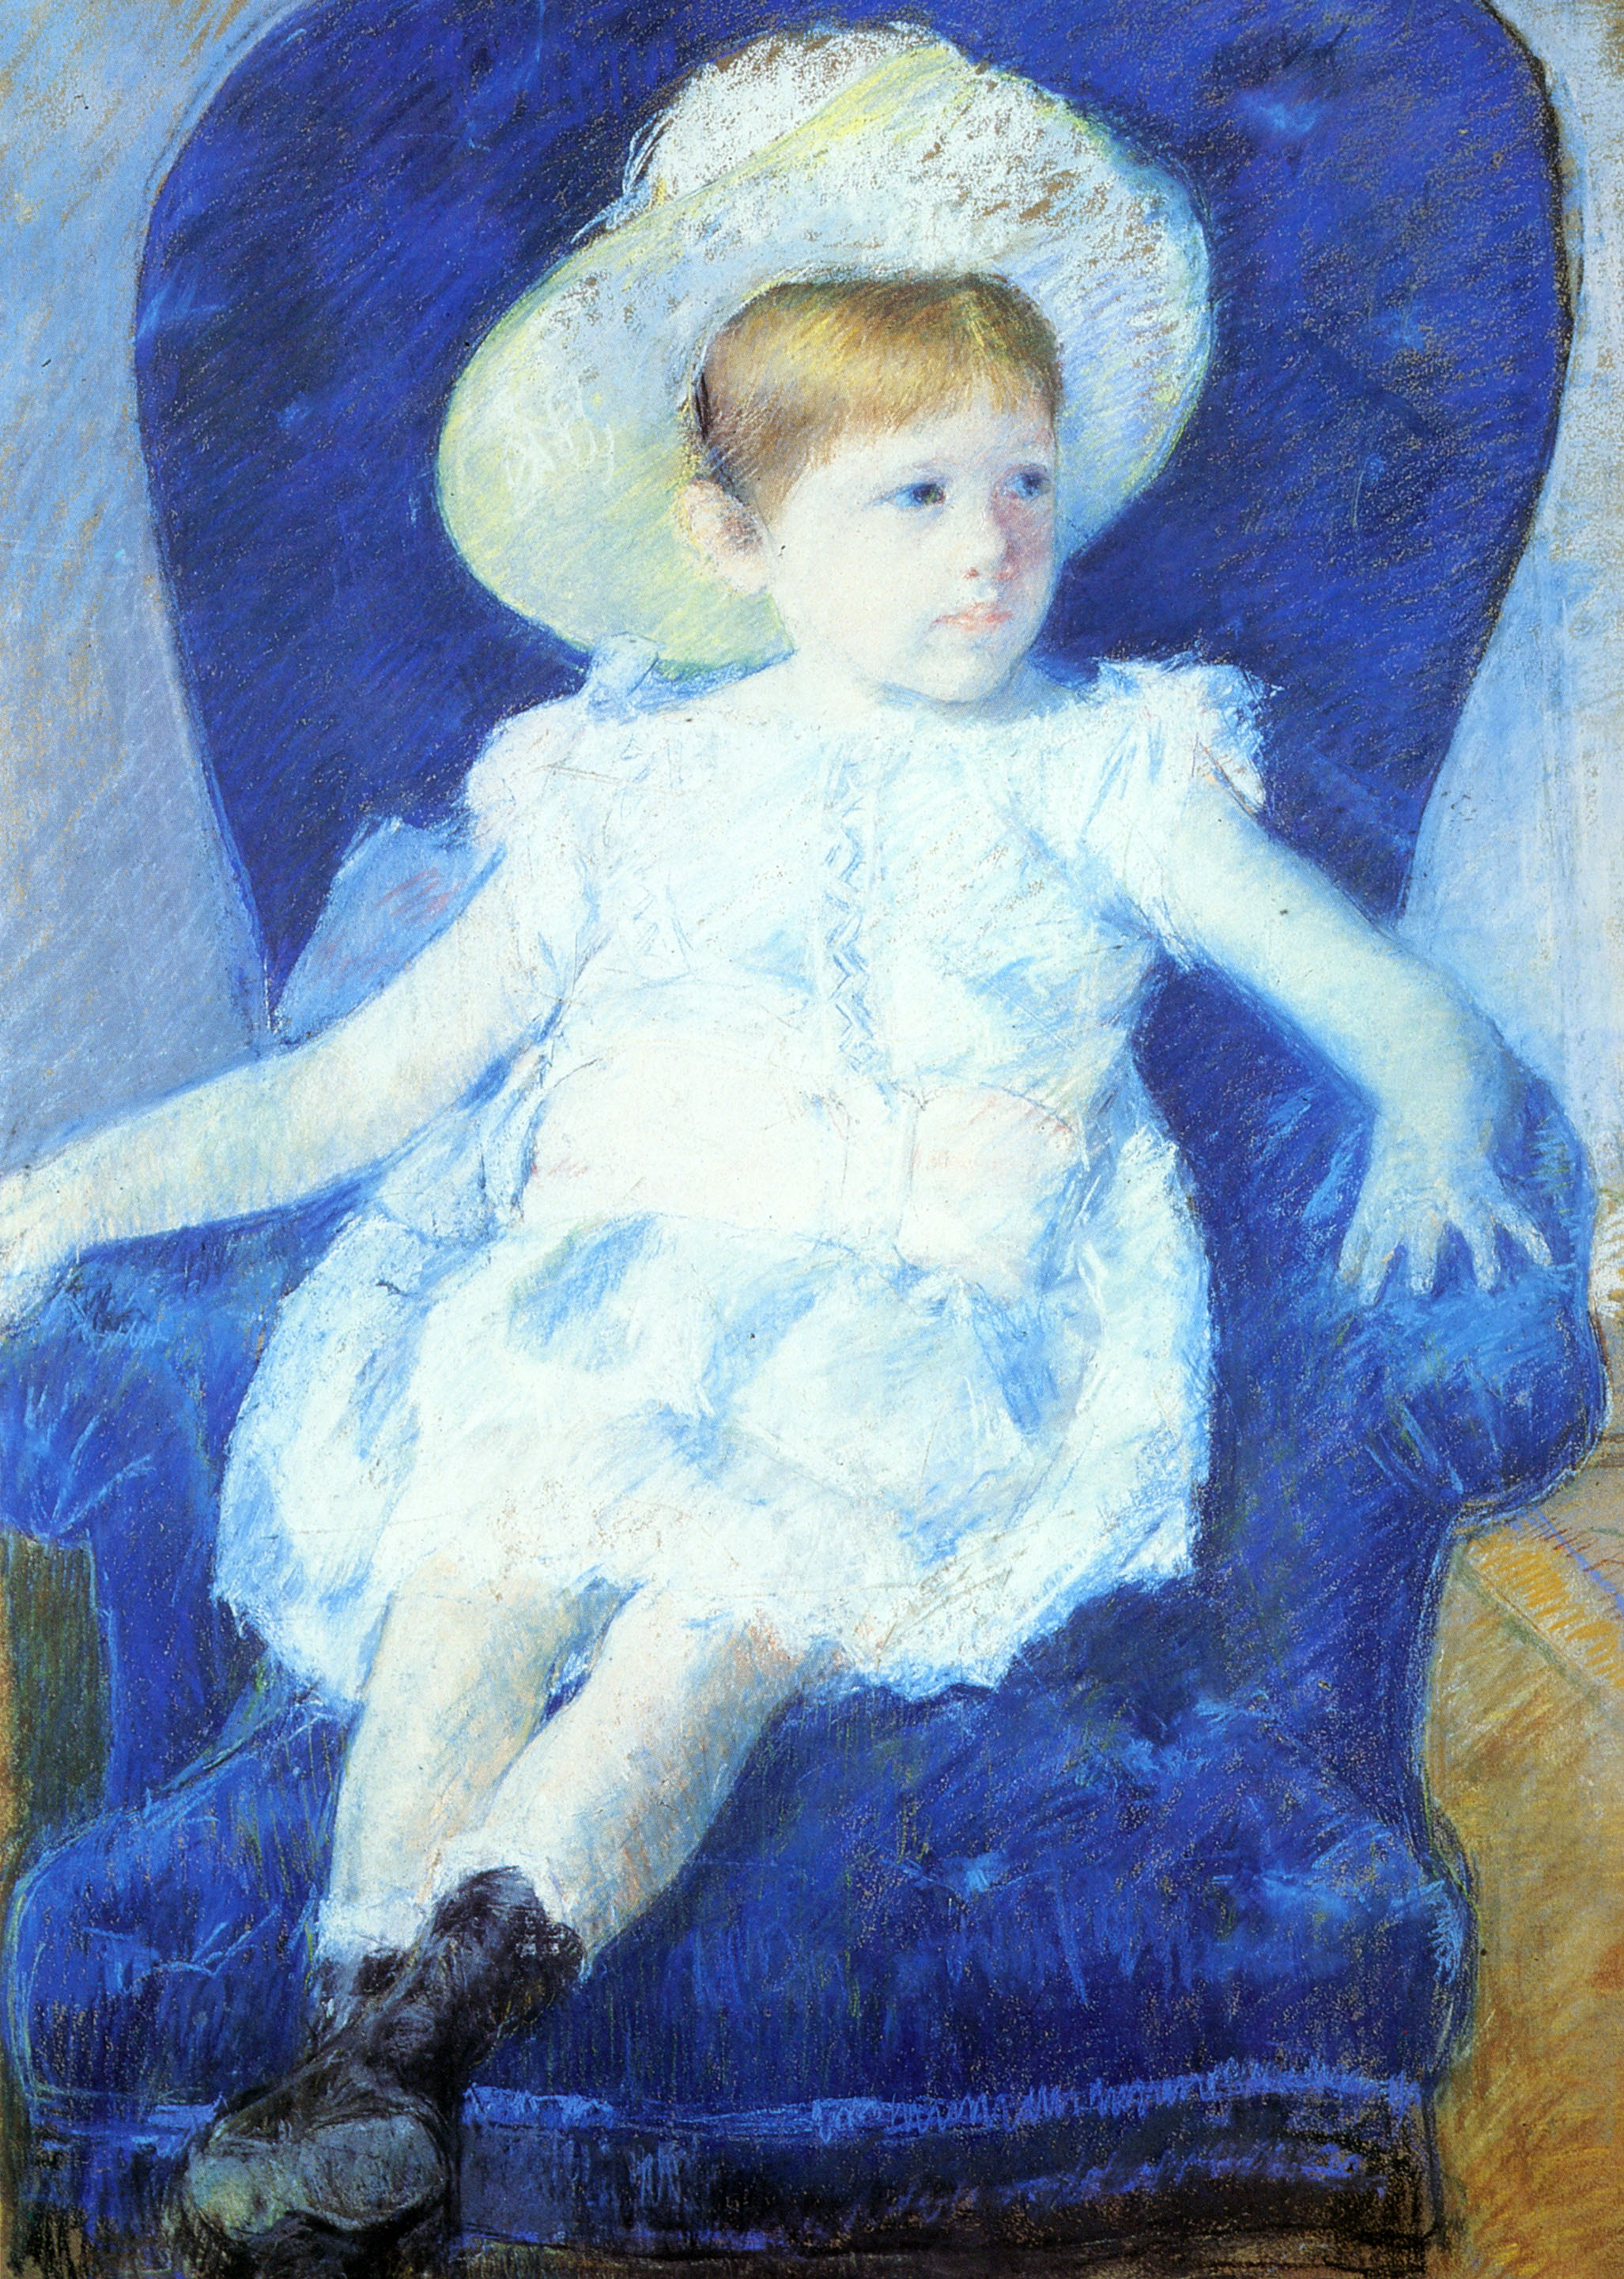 Elsie in a Blue Chair - Mary Cassatt Painting on Canvas